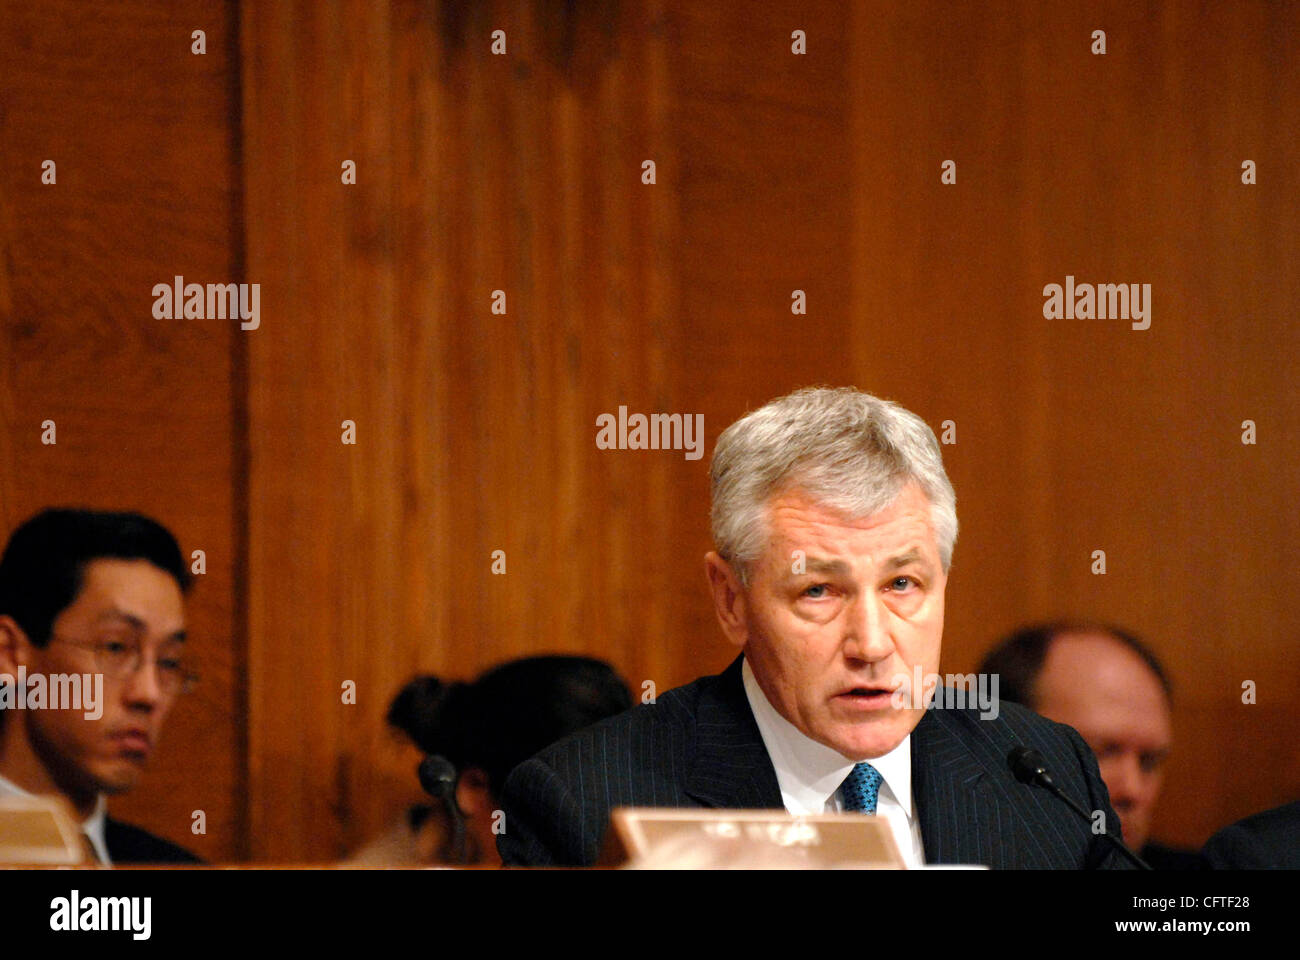 Jan 10, 2007; Washington, DC, USA; Senator CHUCK HAGEL (R-NE) pointedly questions Secretary of State Condoleezza Rice before the Senate Foreign Relations Committee about the President's plan to send over 21,000 more troops to Iraq. Mandatory Credit: Photo by Mark Murrmann/ZUMA Press. (©) Copyright 2 Stock Photo